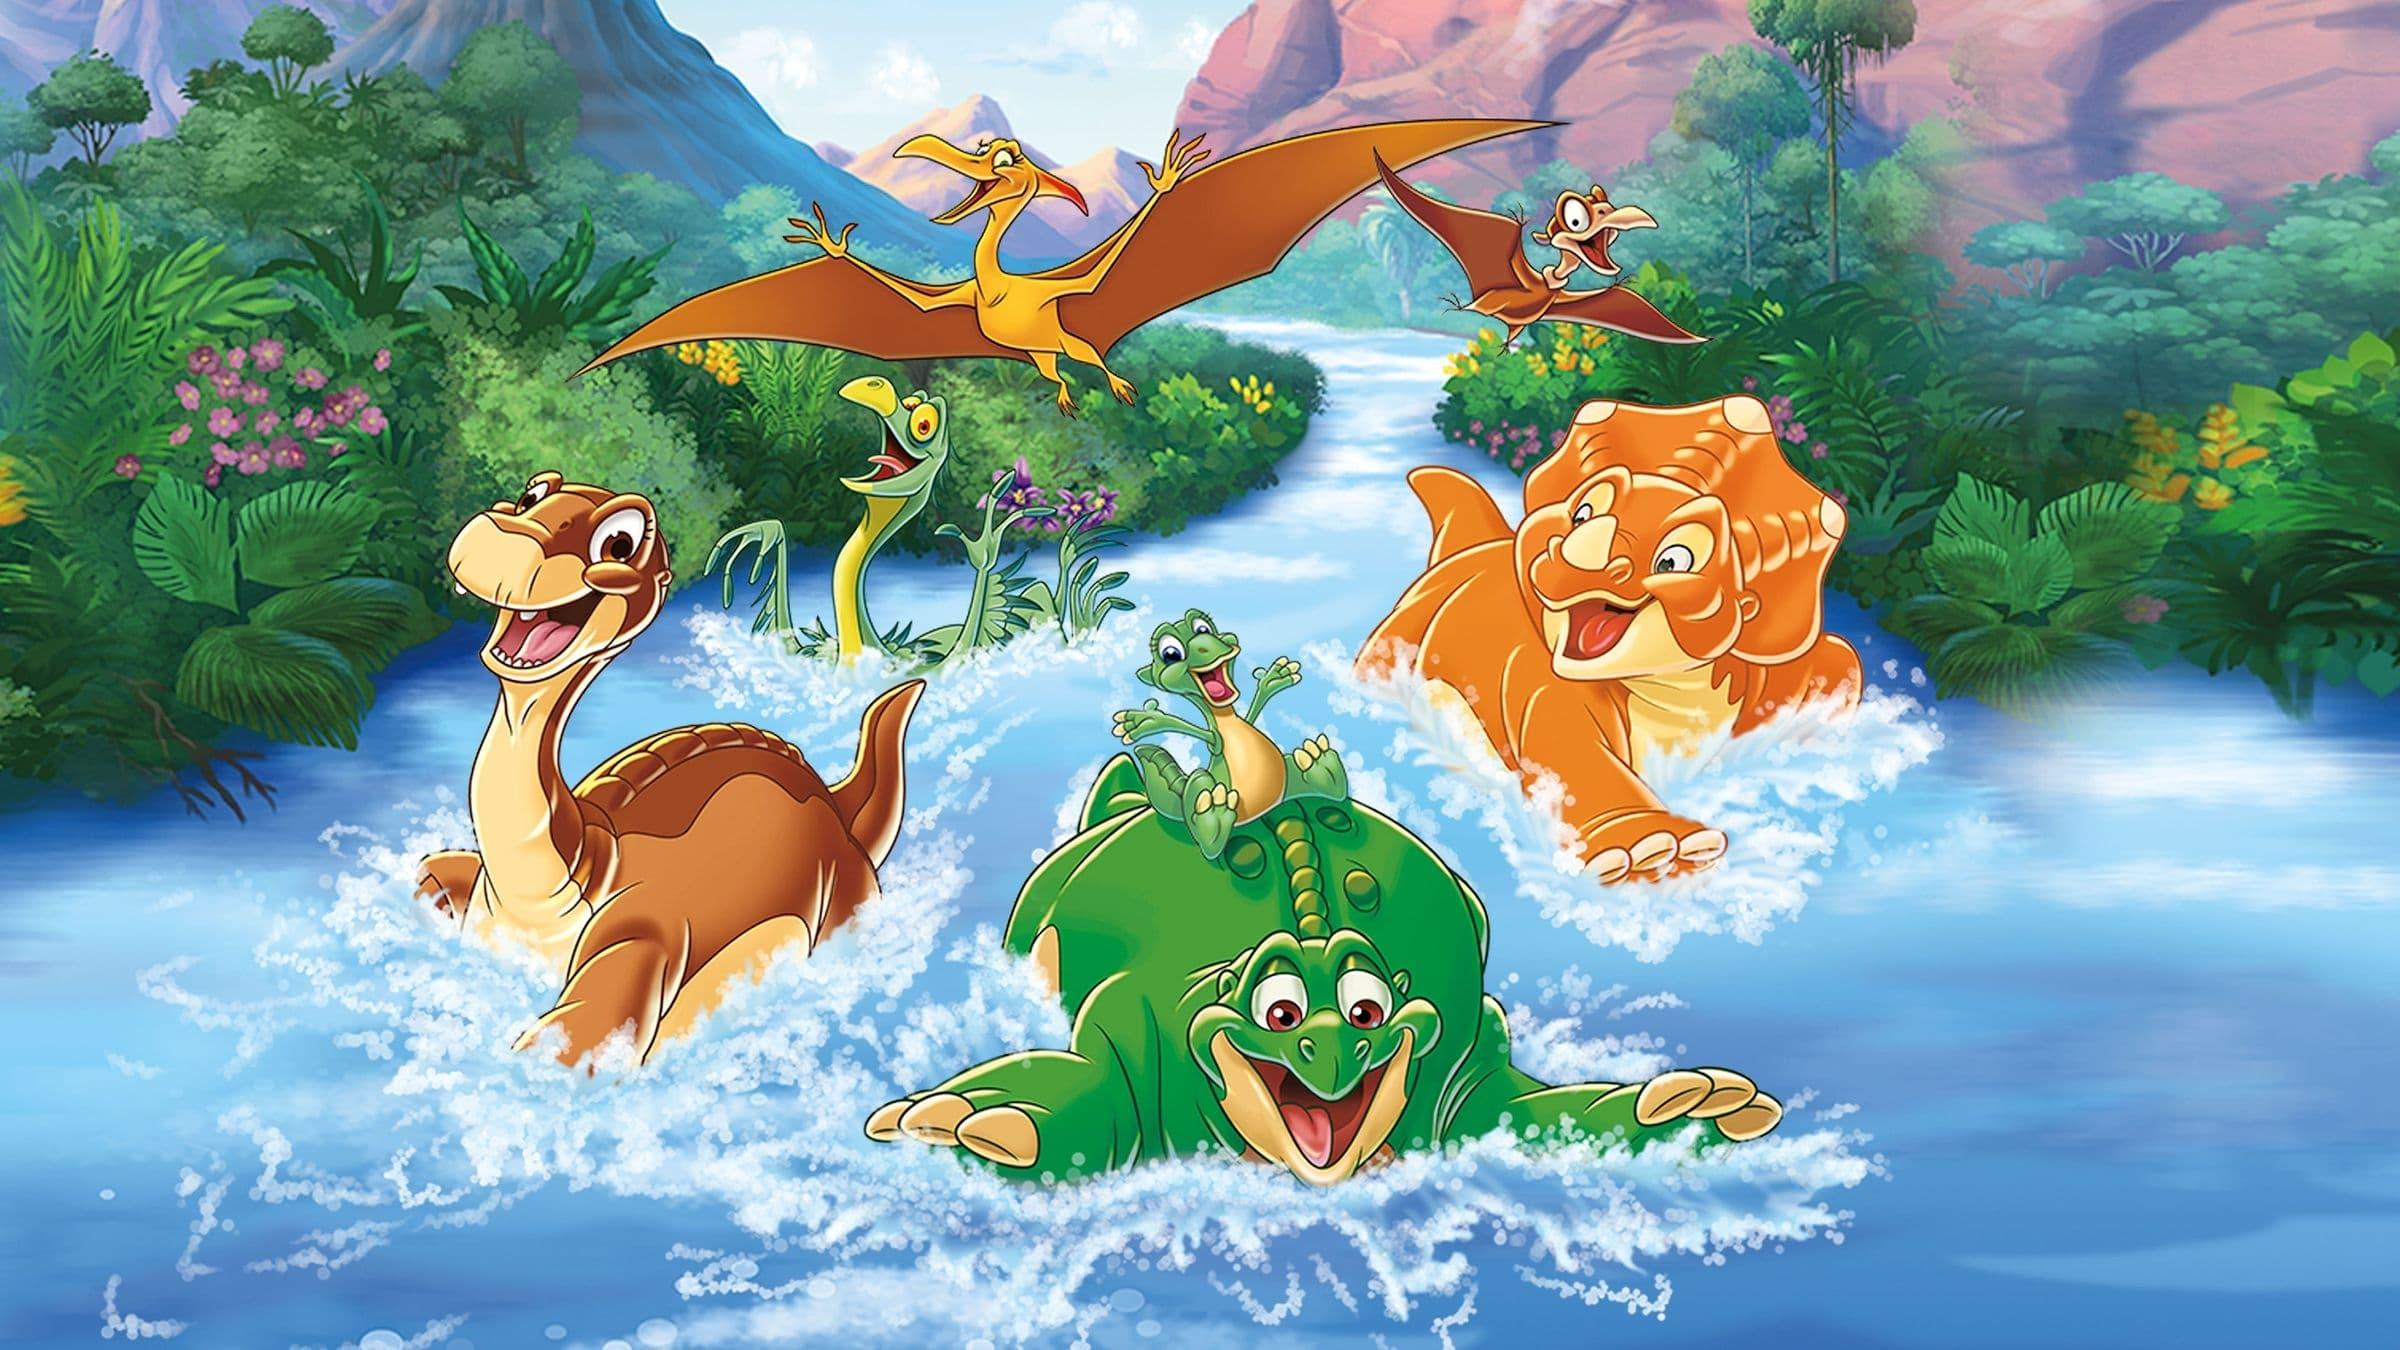 The Land Before Time XIV: Journey of the Brave backdrop